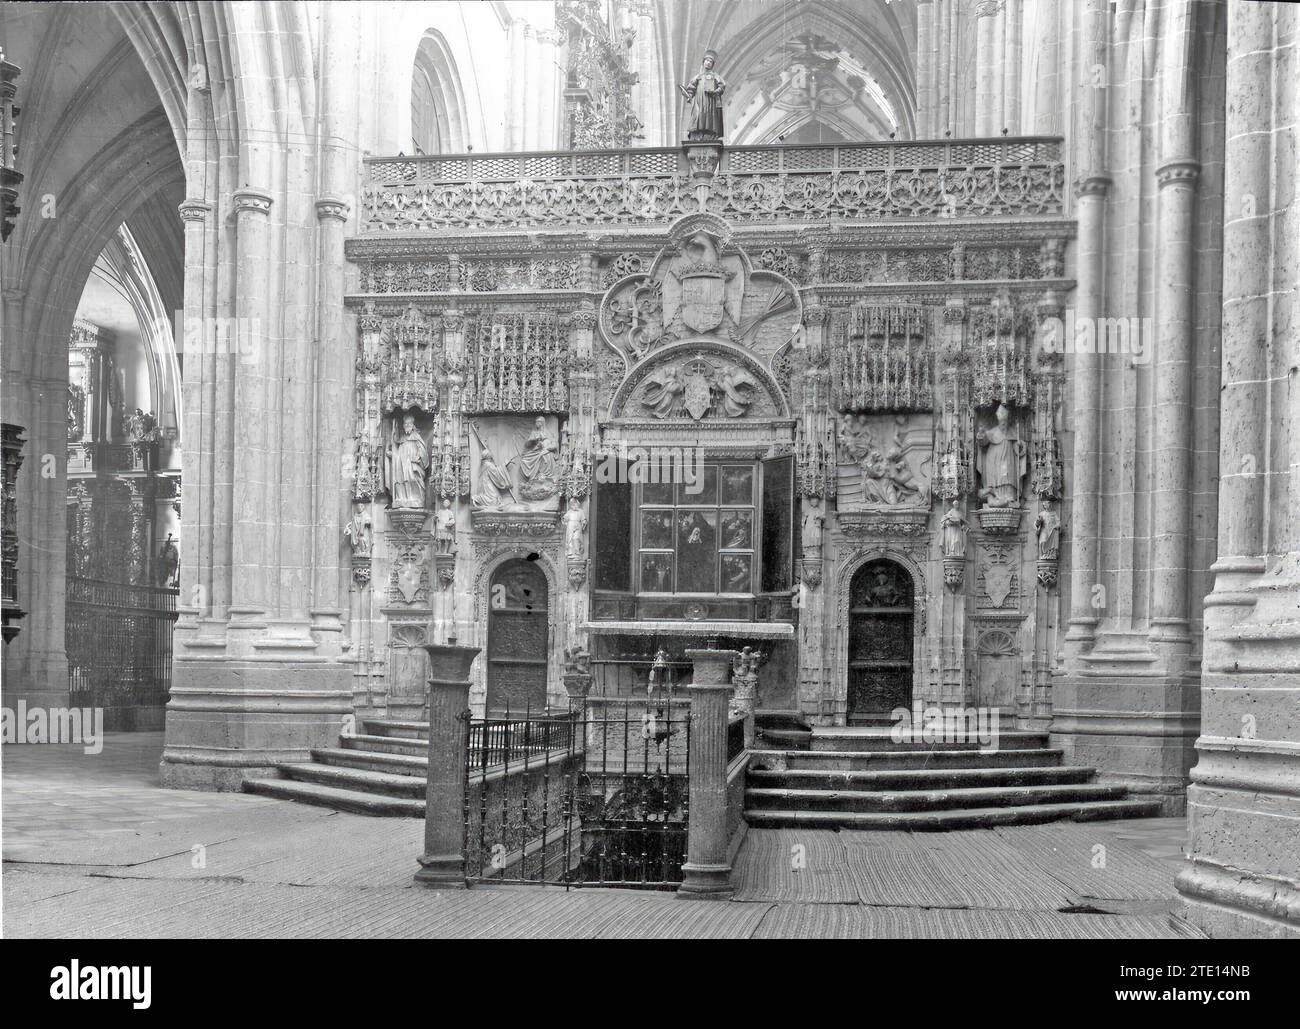 11/30/1931. PRODIGIOUS TRASH OF THE PALENTINE CATHEDRAL.-APPROXIMATE DATE.-It is mainly Gothic with later Renaissance, Baroque and Neoclassical additions. Popularly nicknamed 'the Beautiful Unknown' for not being as well-known as other cathedrals, even though it houses a significant amount of works of art of great quality and value inside. The choir stands on five stairs and is an excellent work of the Spanish Renaissance , of late Gothic and Plateresque character. Credit: Album / Archivo ABC / Albino R. Alonso Stock Photo